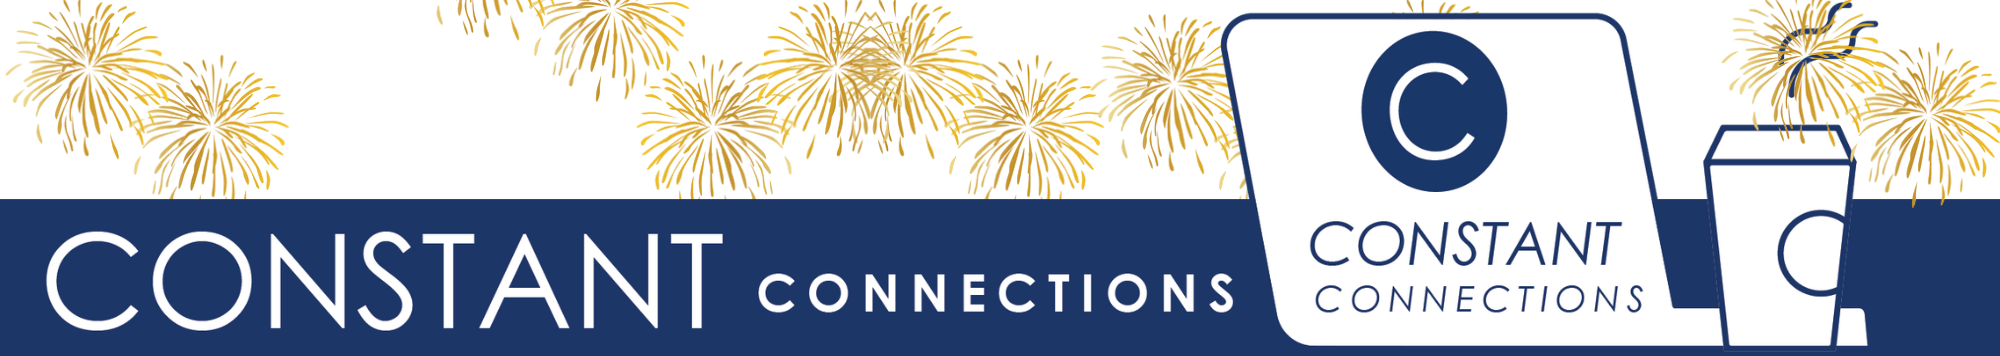 CONSTANT Connections header with fireworks background